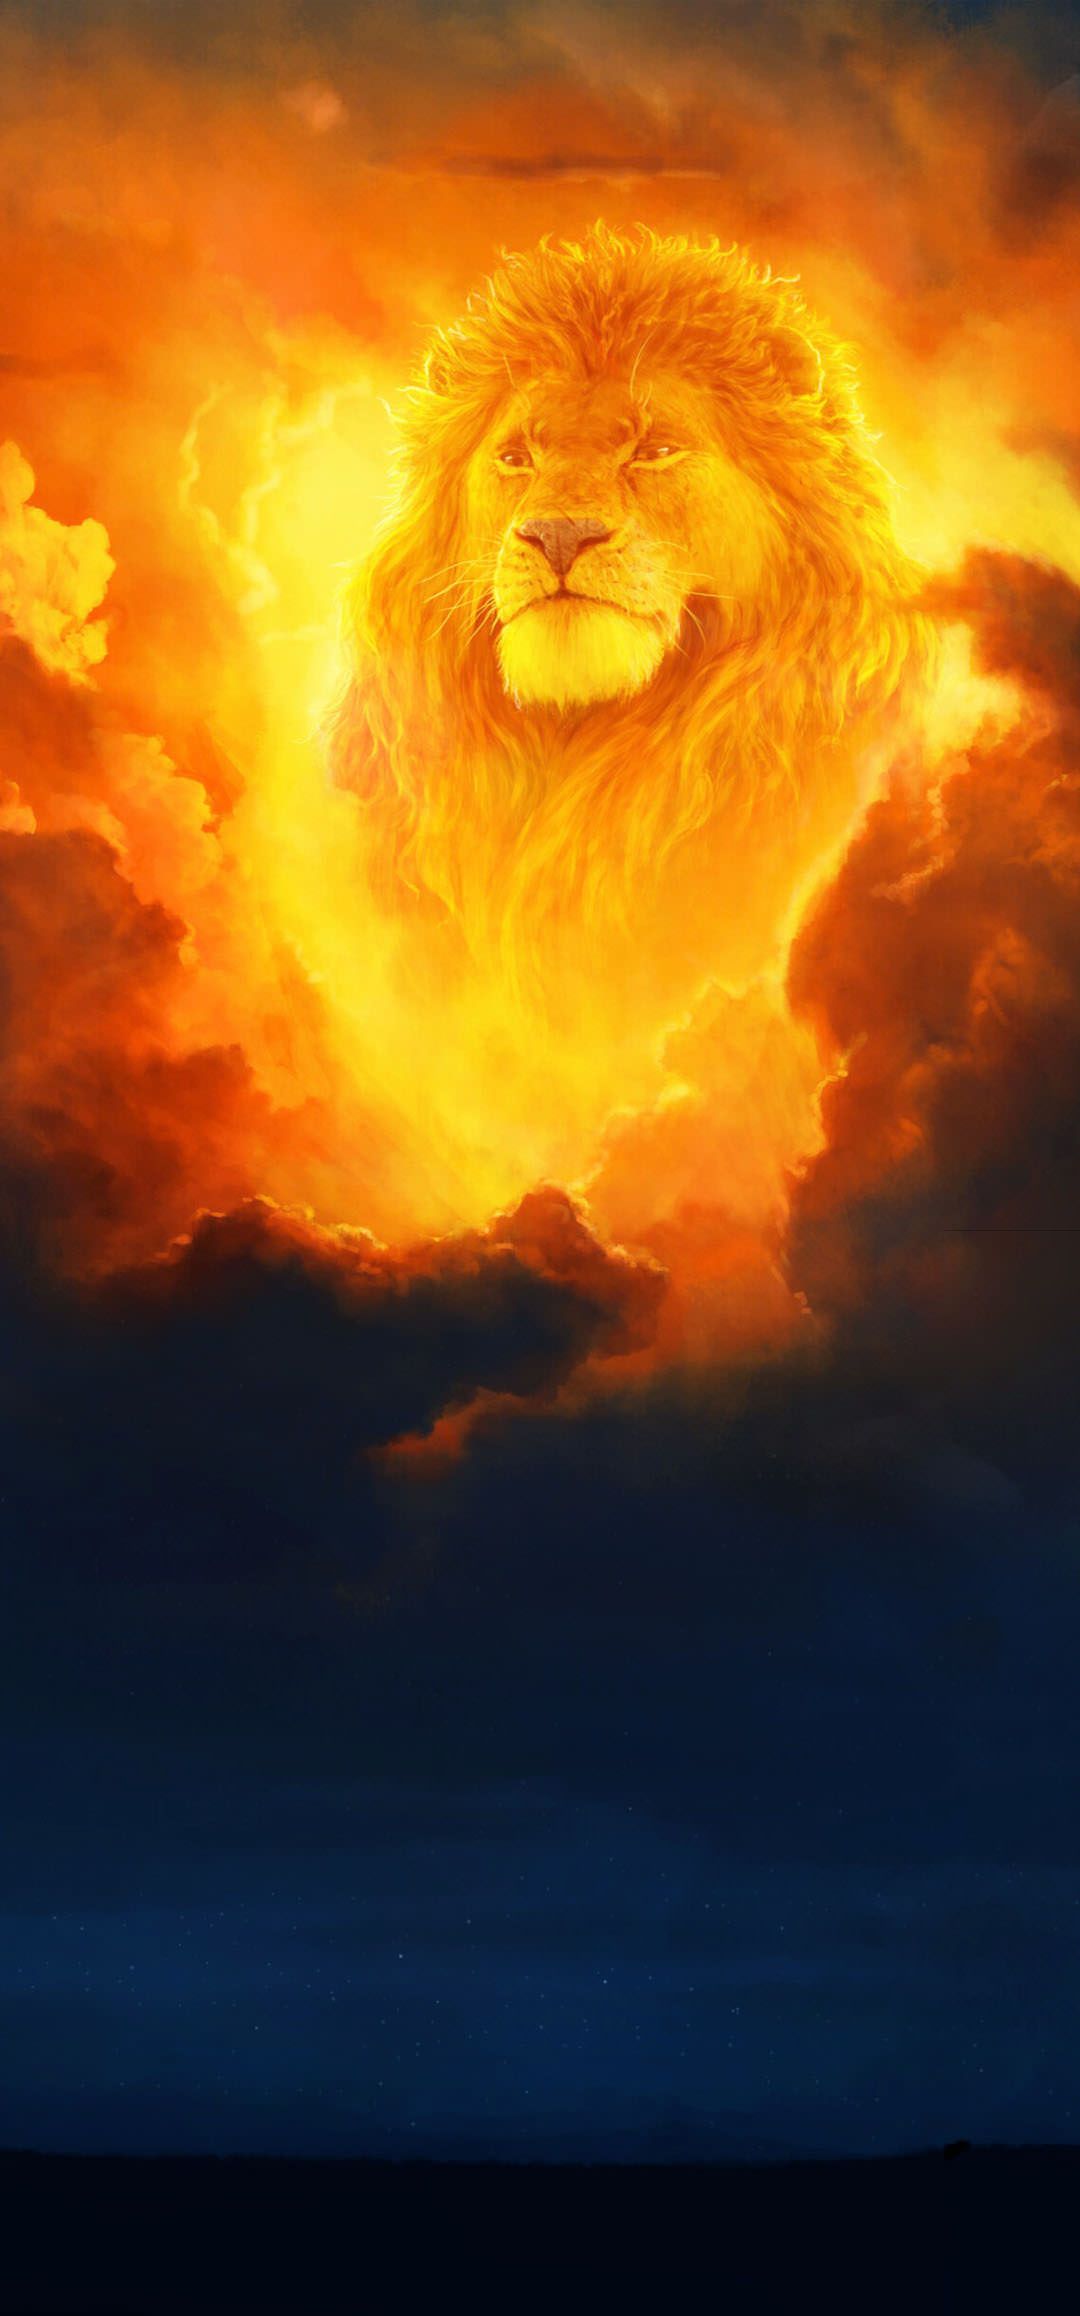 The Lion King Mufasa HD Wallpapers 1080 × 2316.